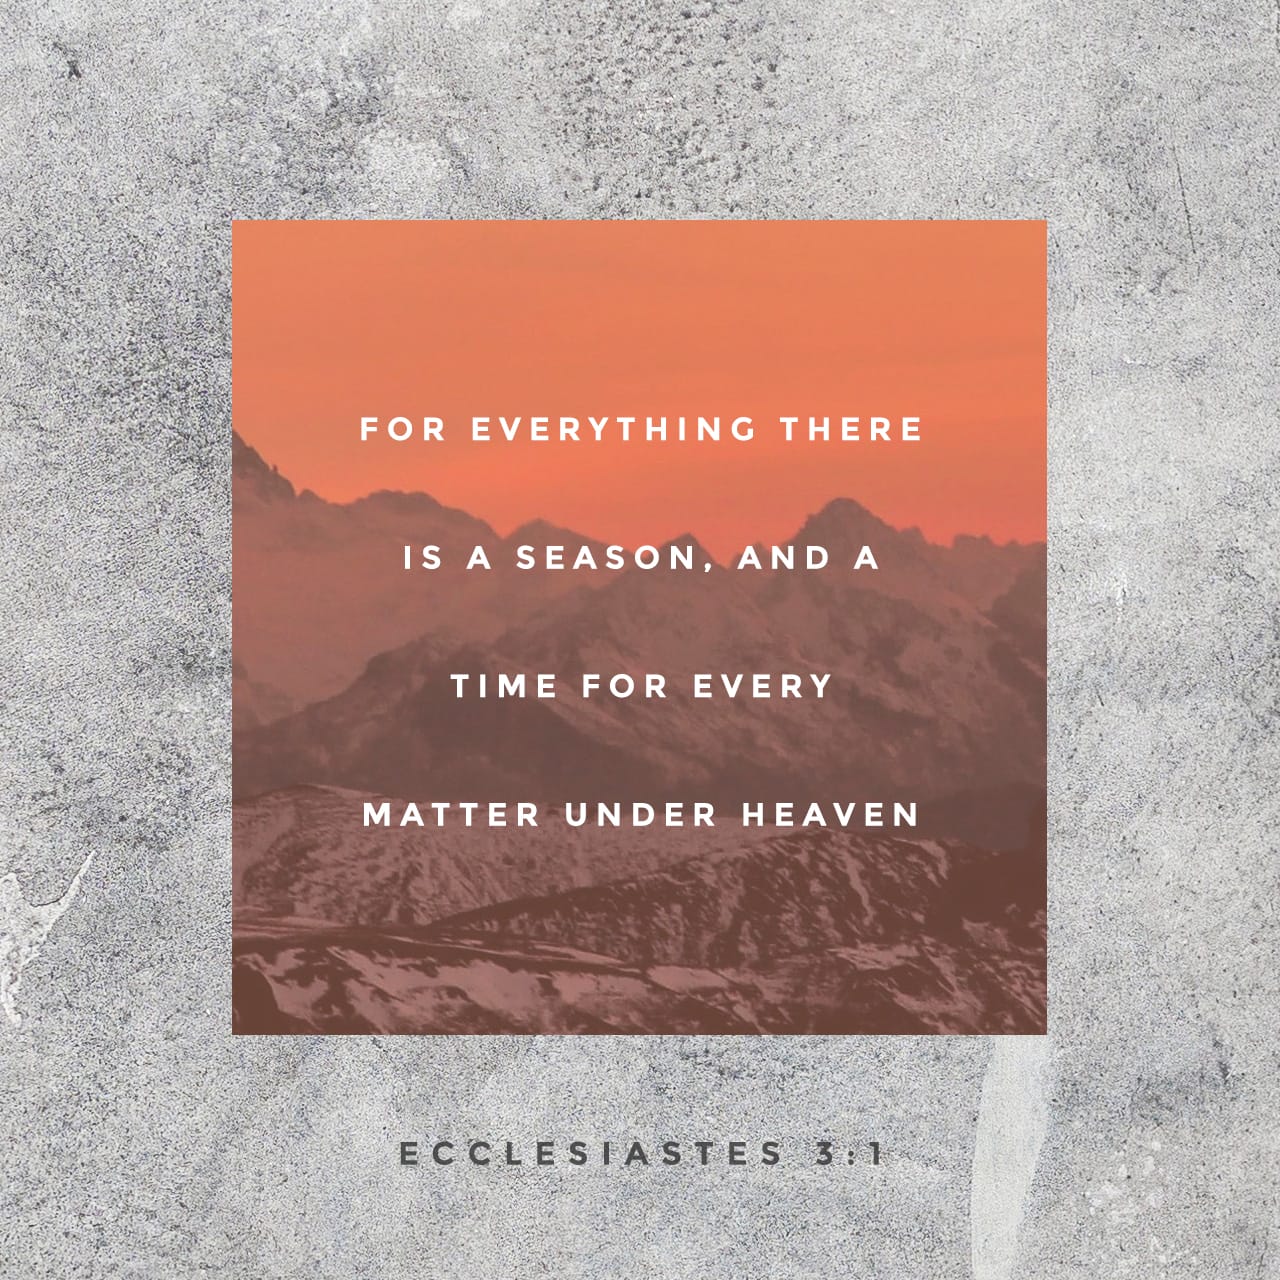 Ecclesiastes 3:1-8 To every thing there is a season, and a time ...